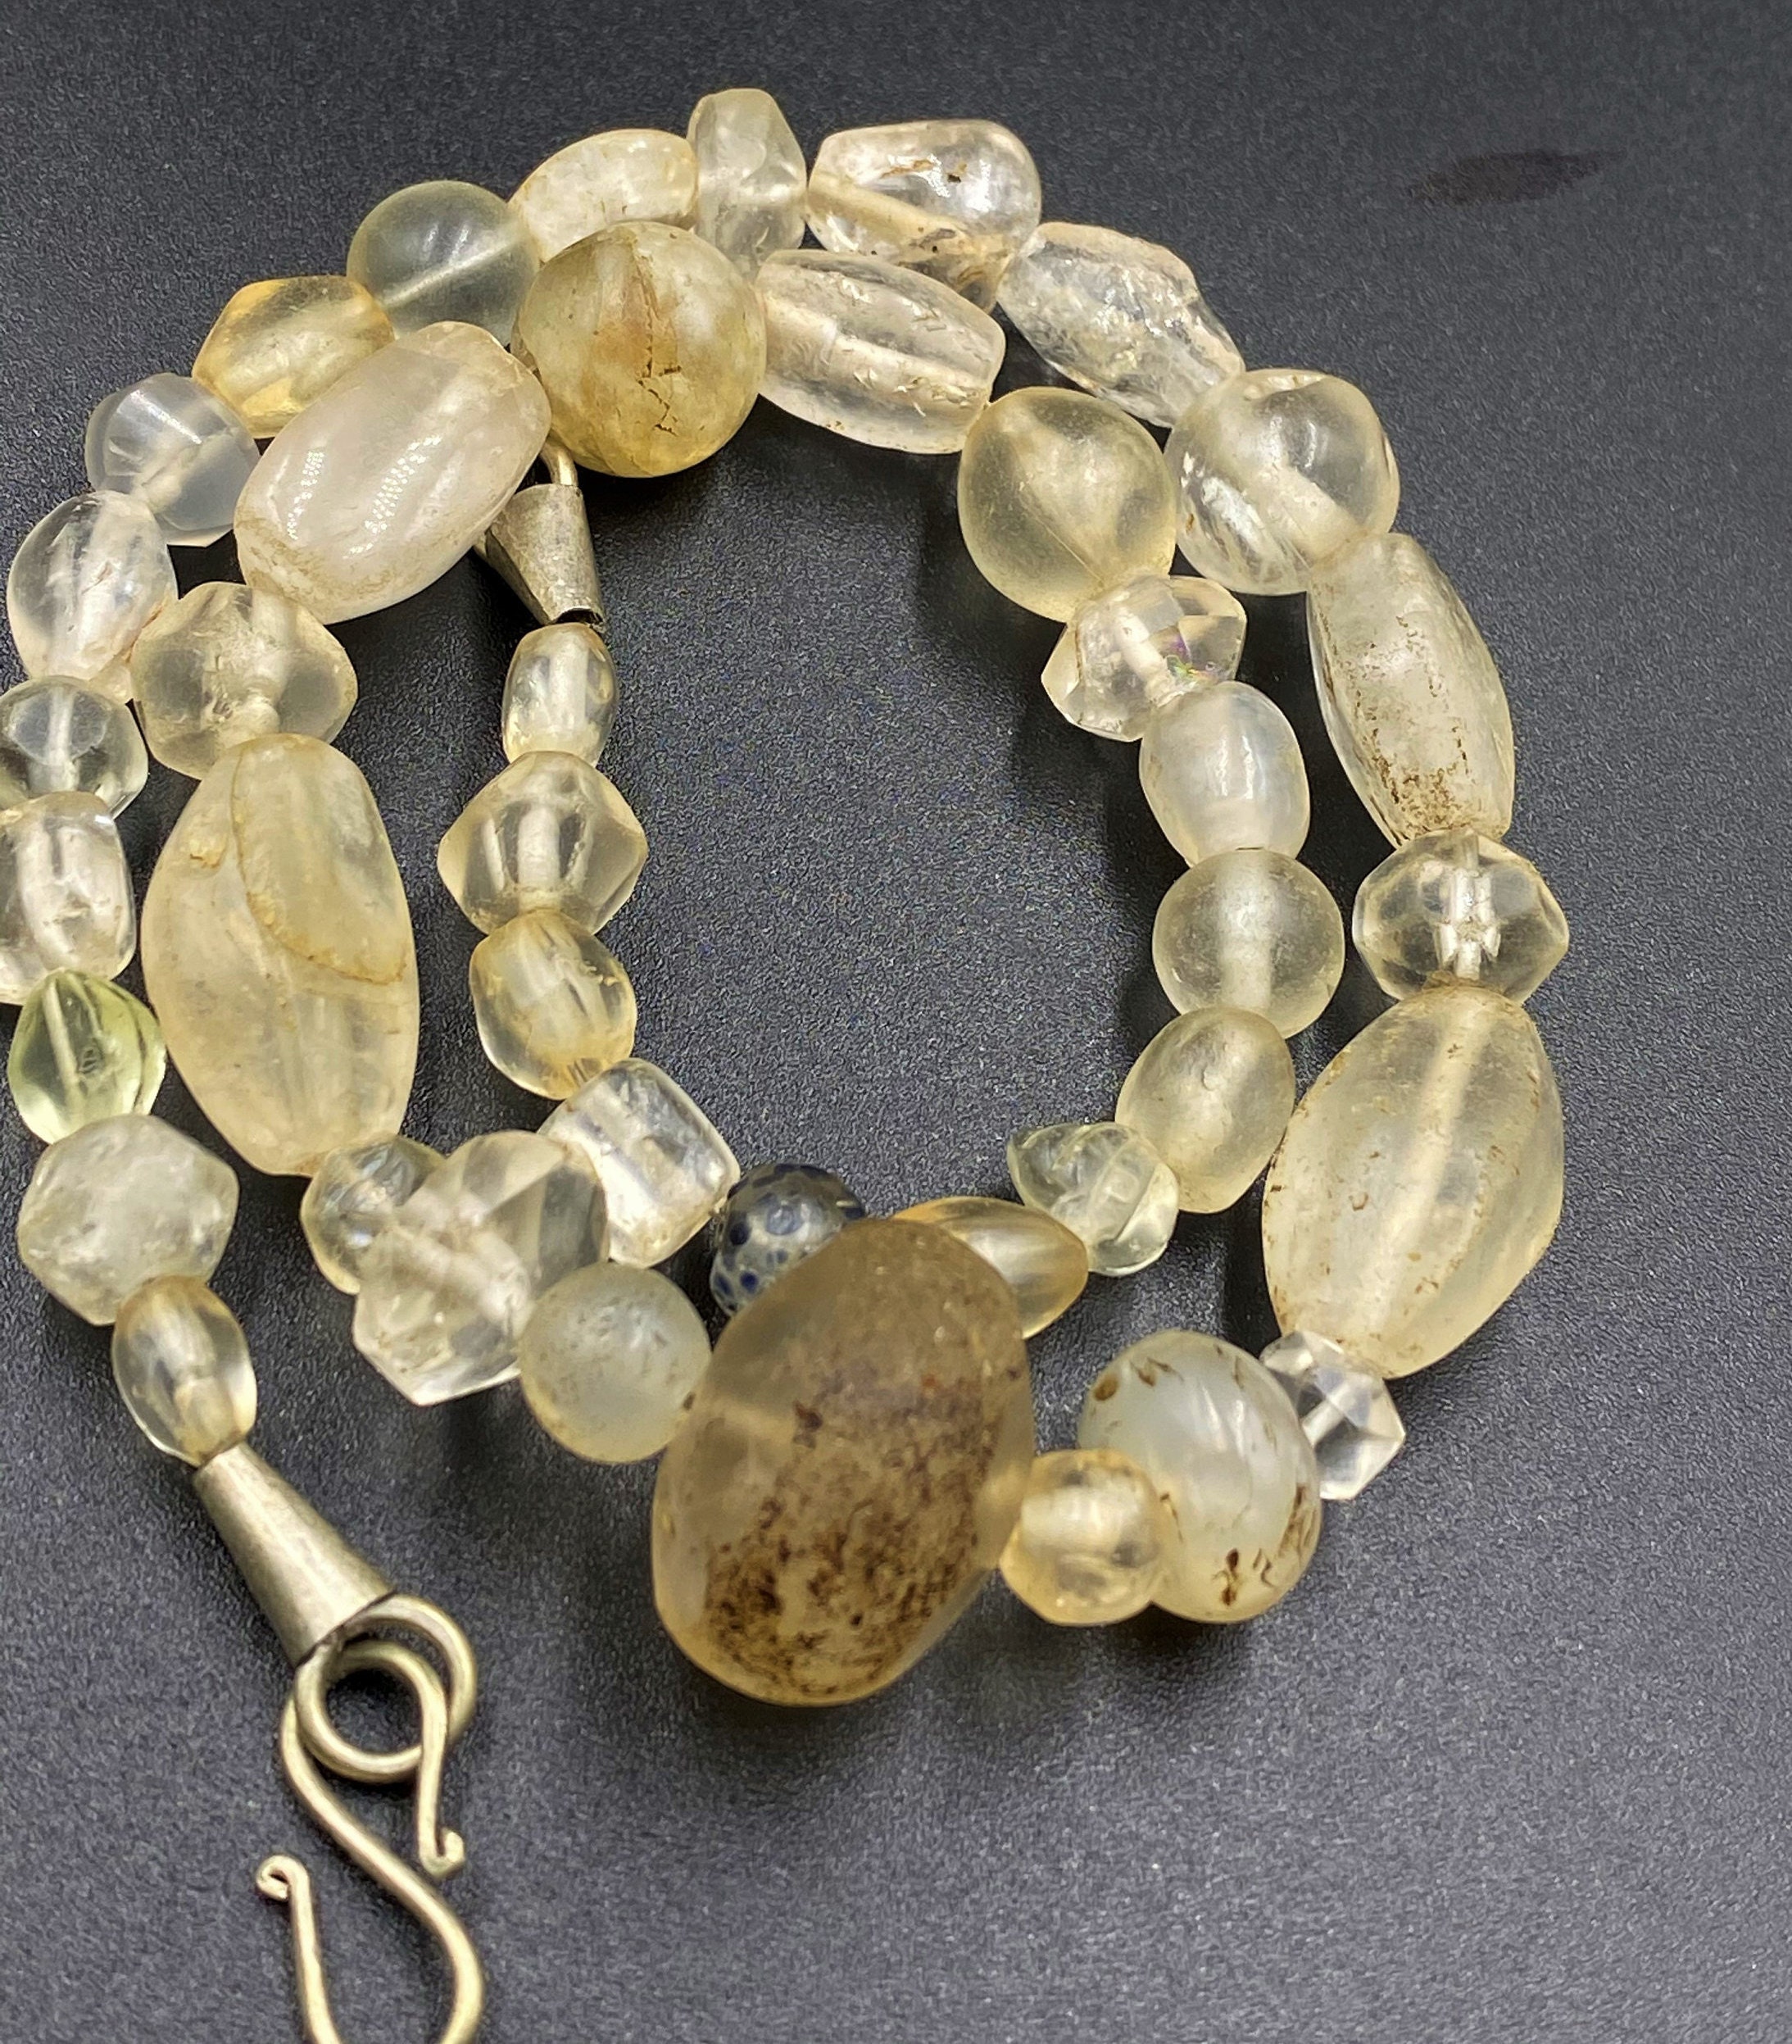 Rare Ancient Crystals Quartz Beads Necklace From Central Asia - Etsy UK